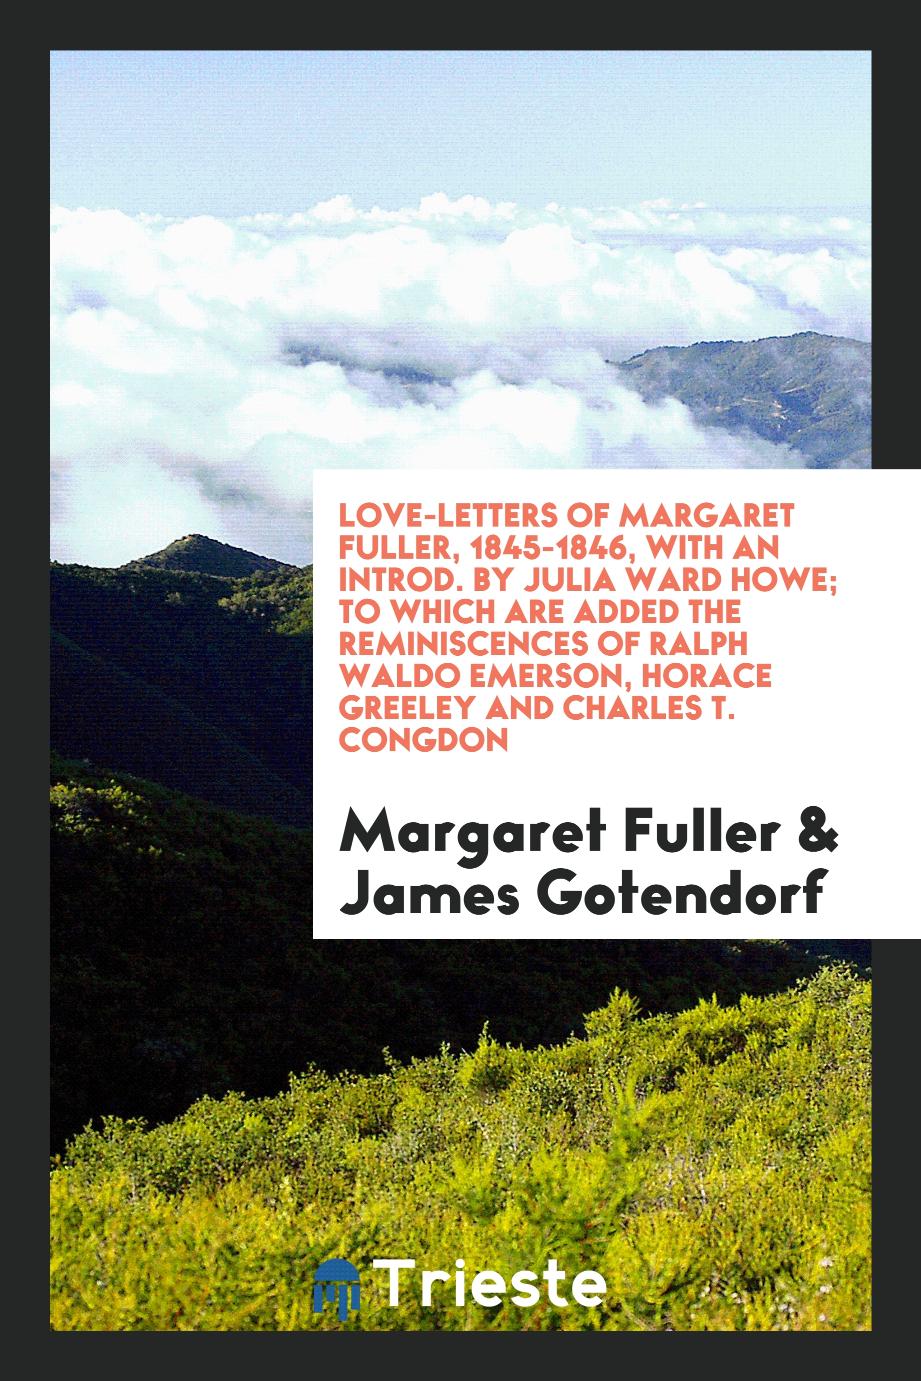 Love-letters of Margaret Fuller, 1845-1846, with an introd. by Julia Ward Howe; to which are added the reminiscences of Ralph Waldo Emerson, Horace Greeley and Charles T. Congdon